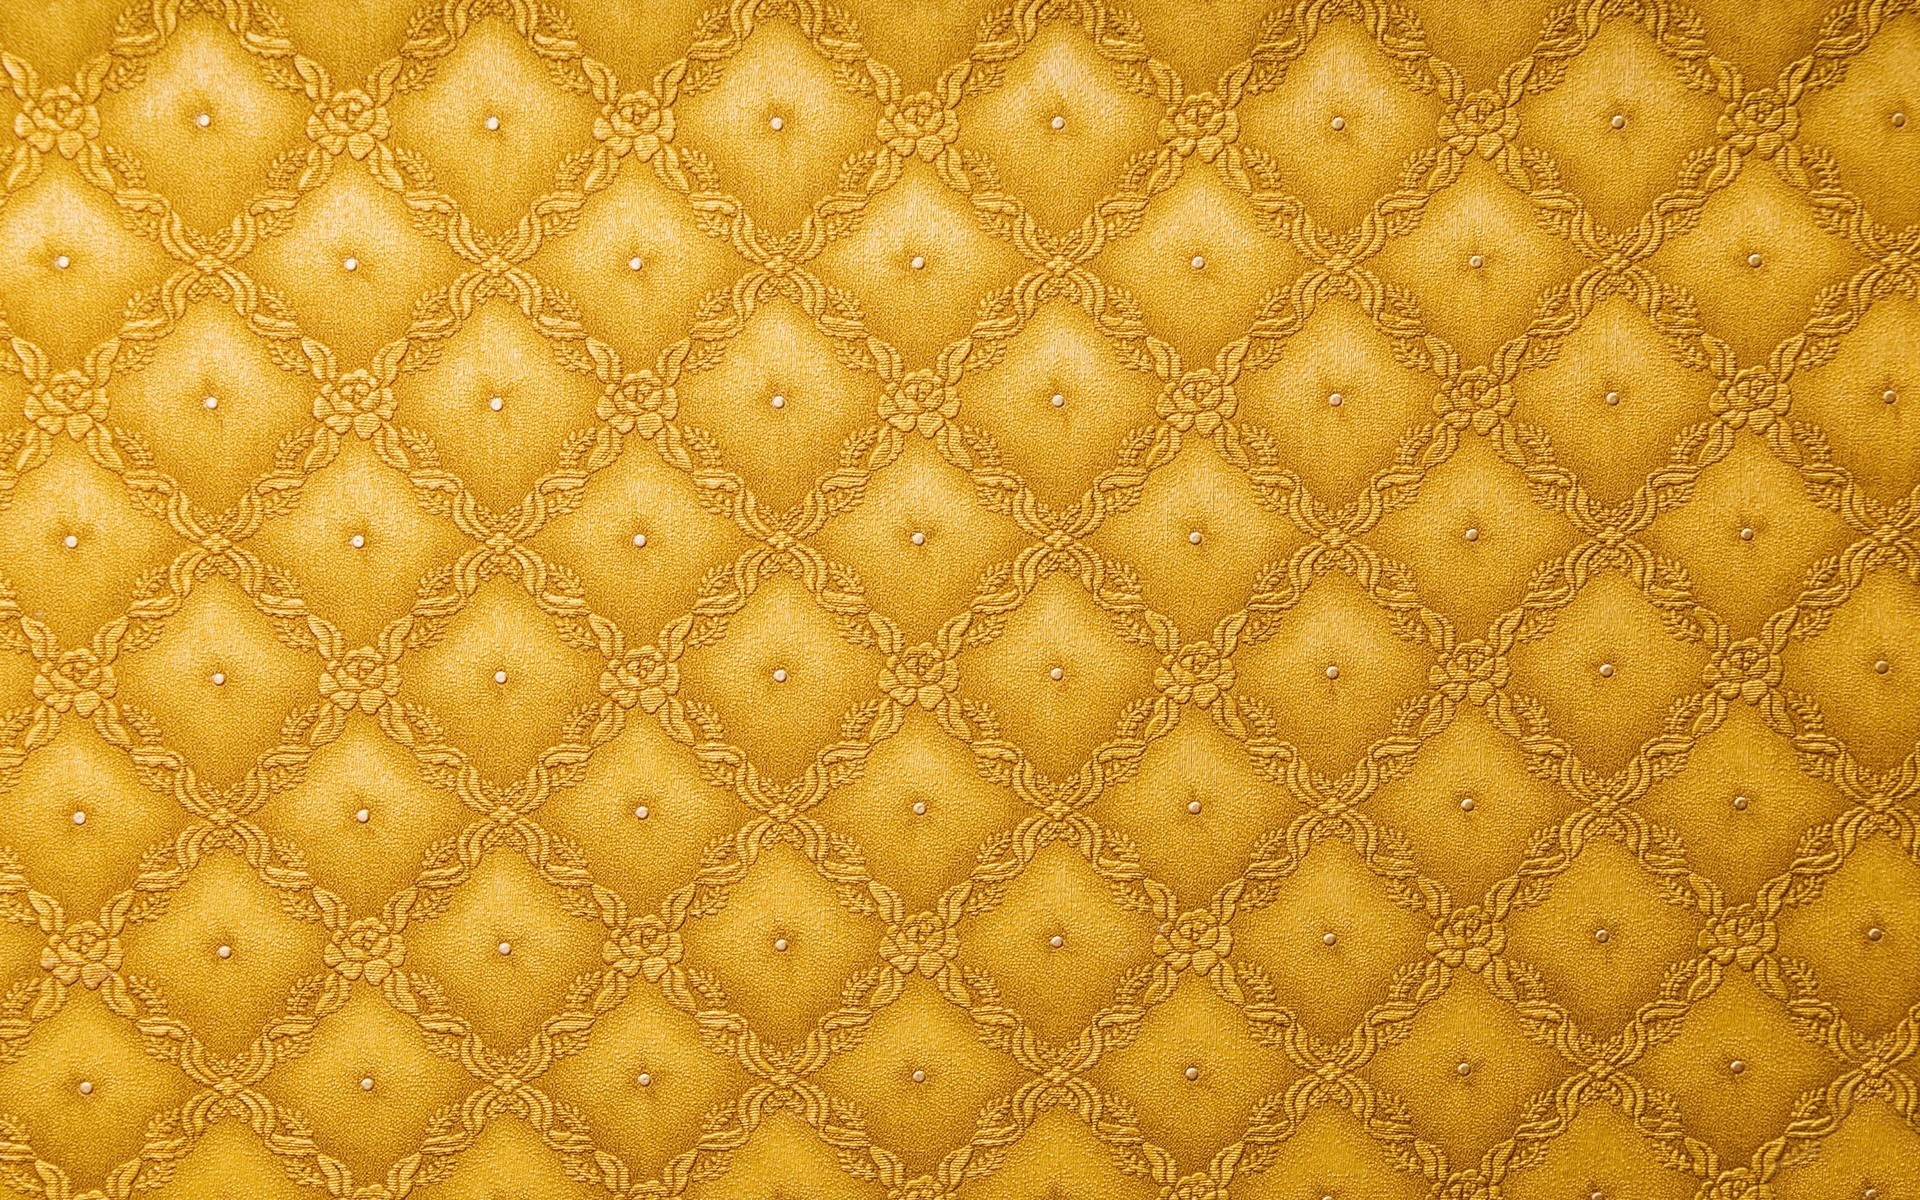 General 1920x1200 pattern texture yellow